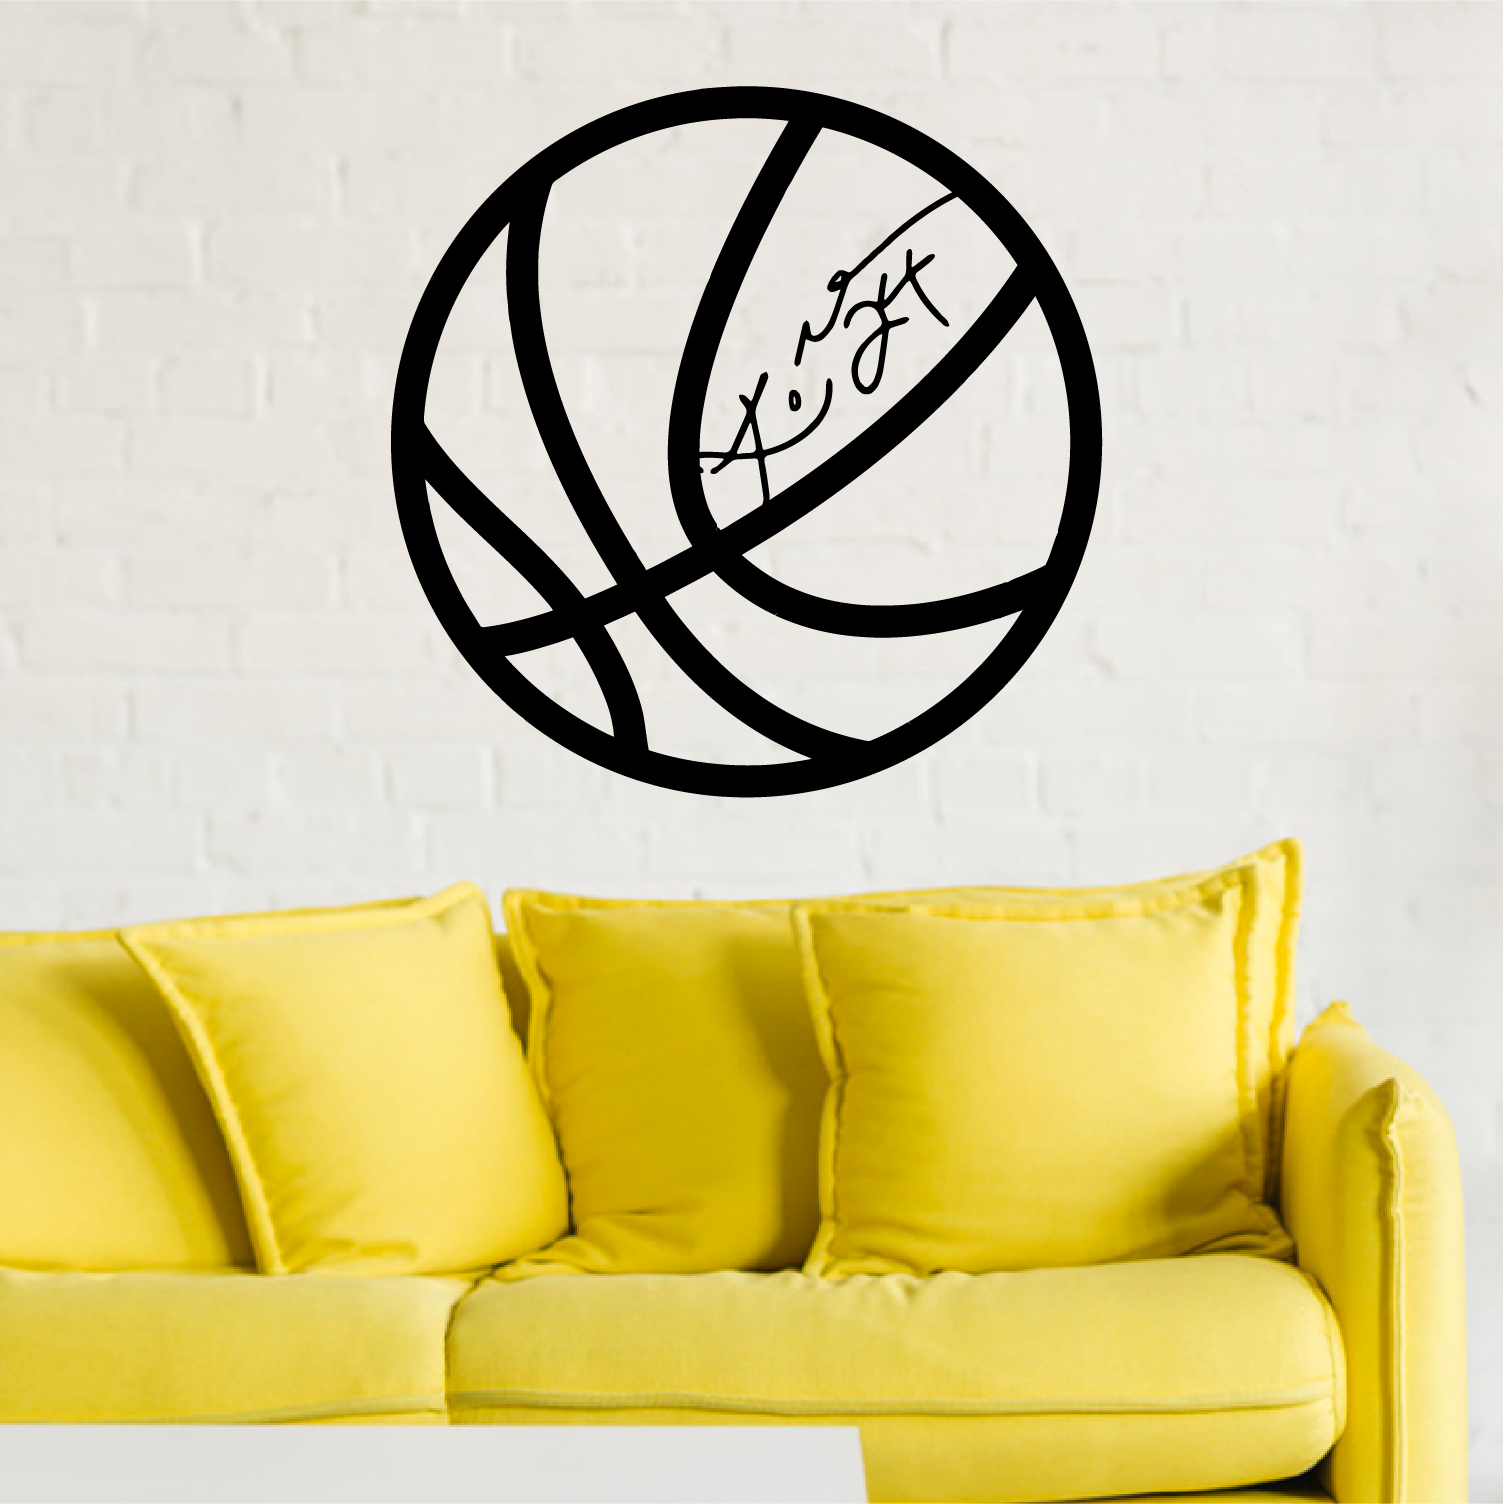 Kobe Bryant wall sticker. Ball with signature. Number 24 wall decal